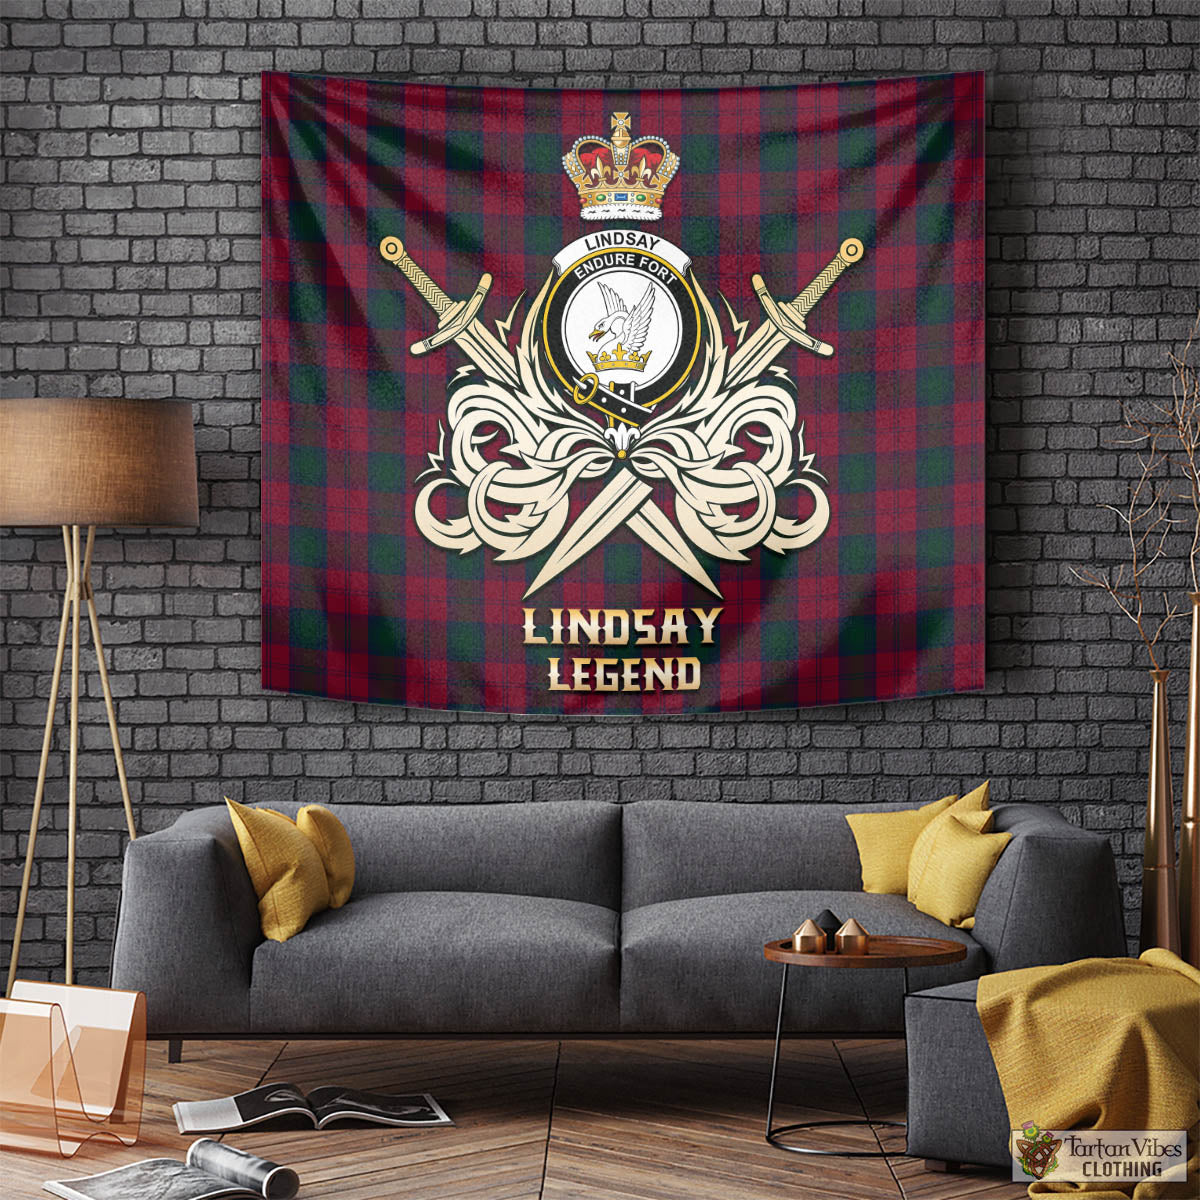 Tartan Vibes Clothing Lindsay Tartan Tapestry with Clan Crest and the Golden Sword of Courageous Legacy